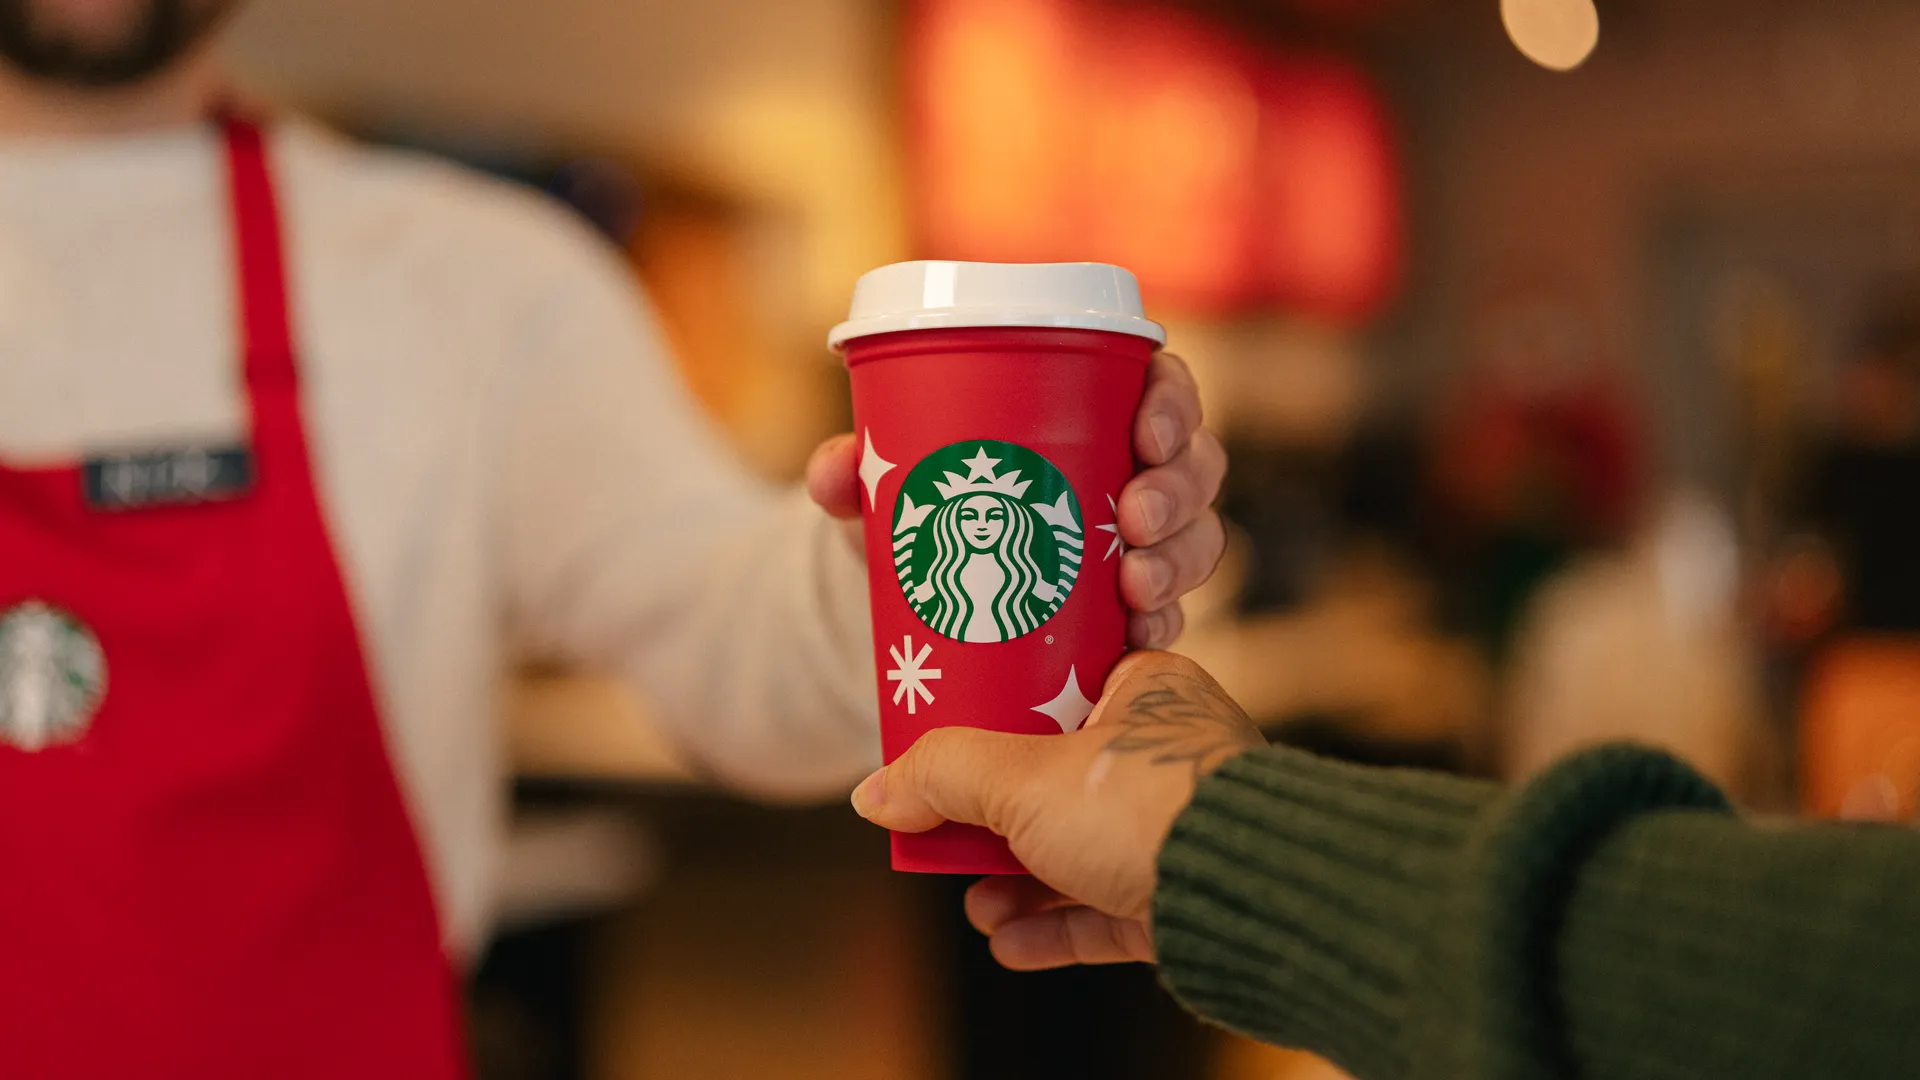 Nov. 16 is Red Cup Day! Here’s how to get your free Starbucks Red Reusable Cup